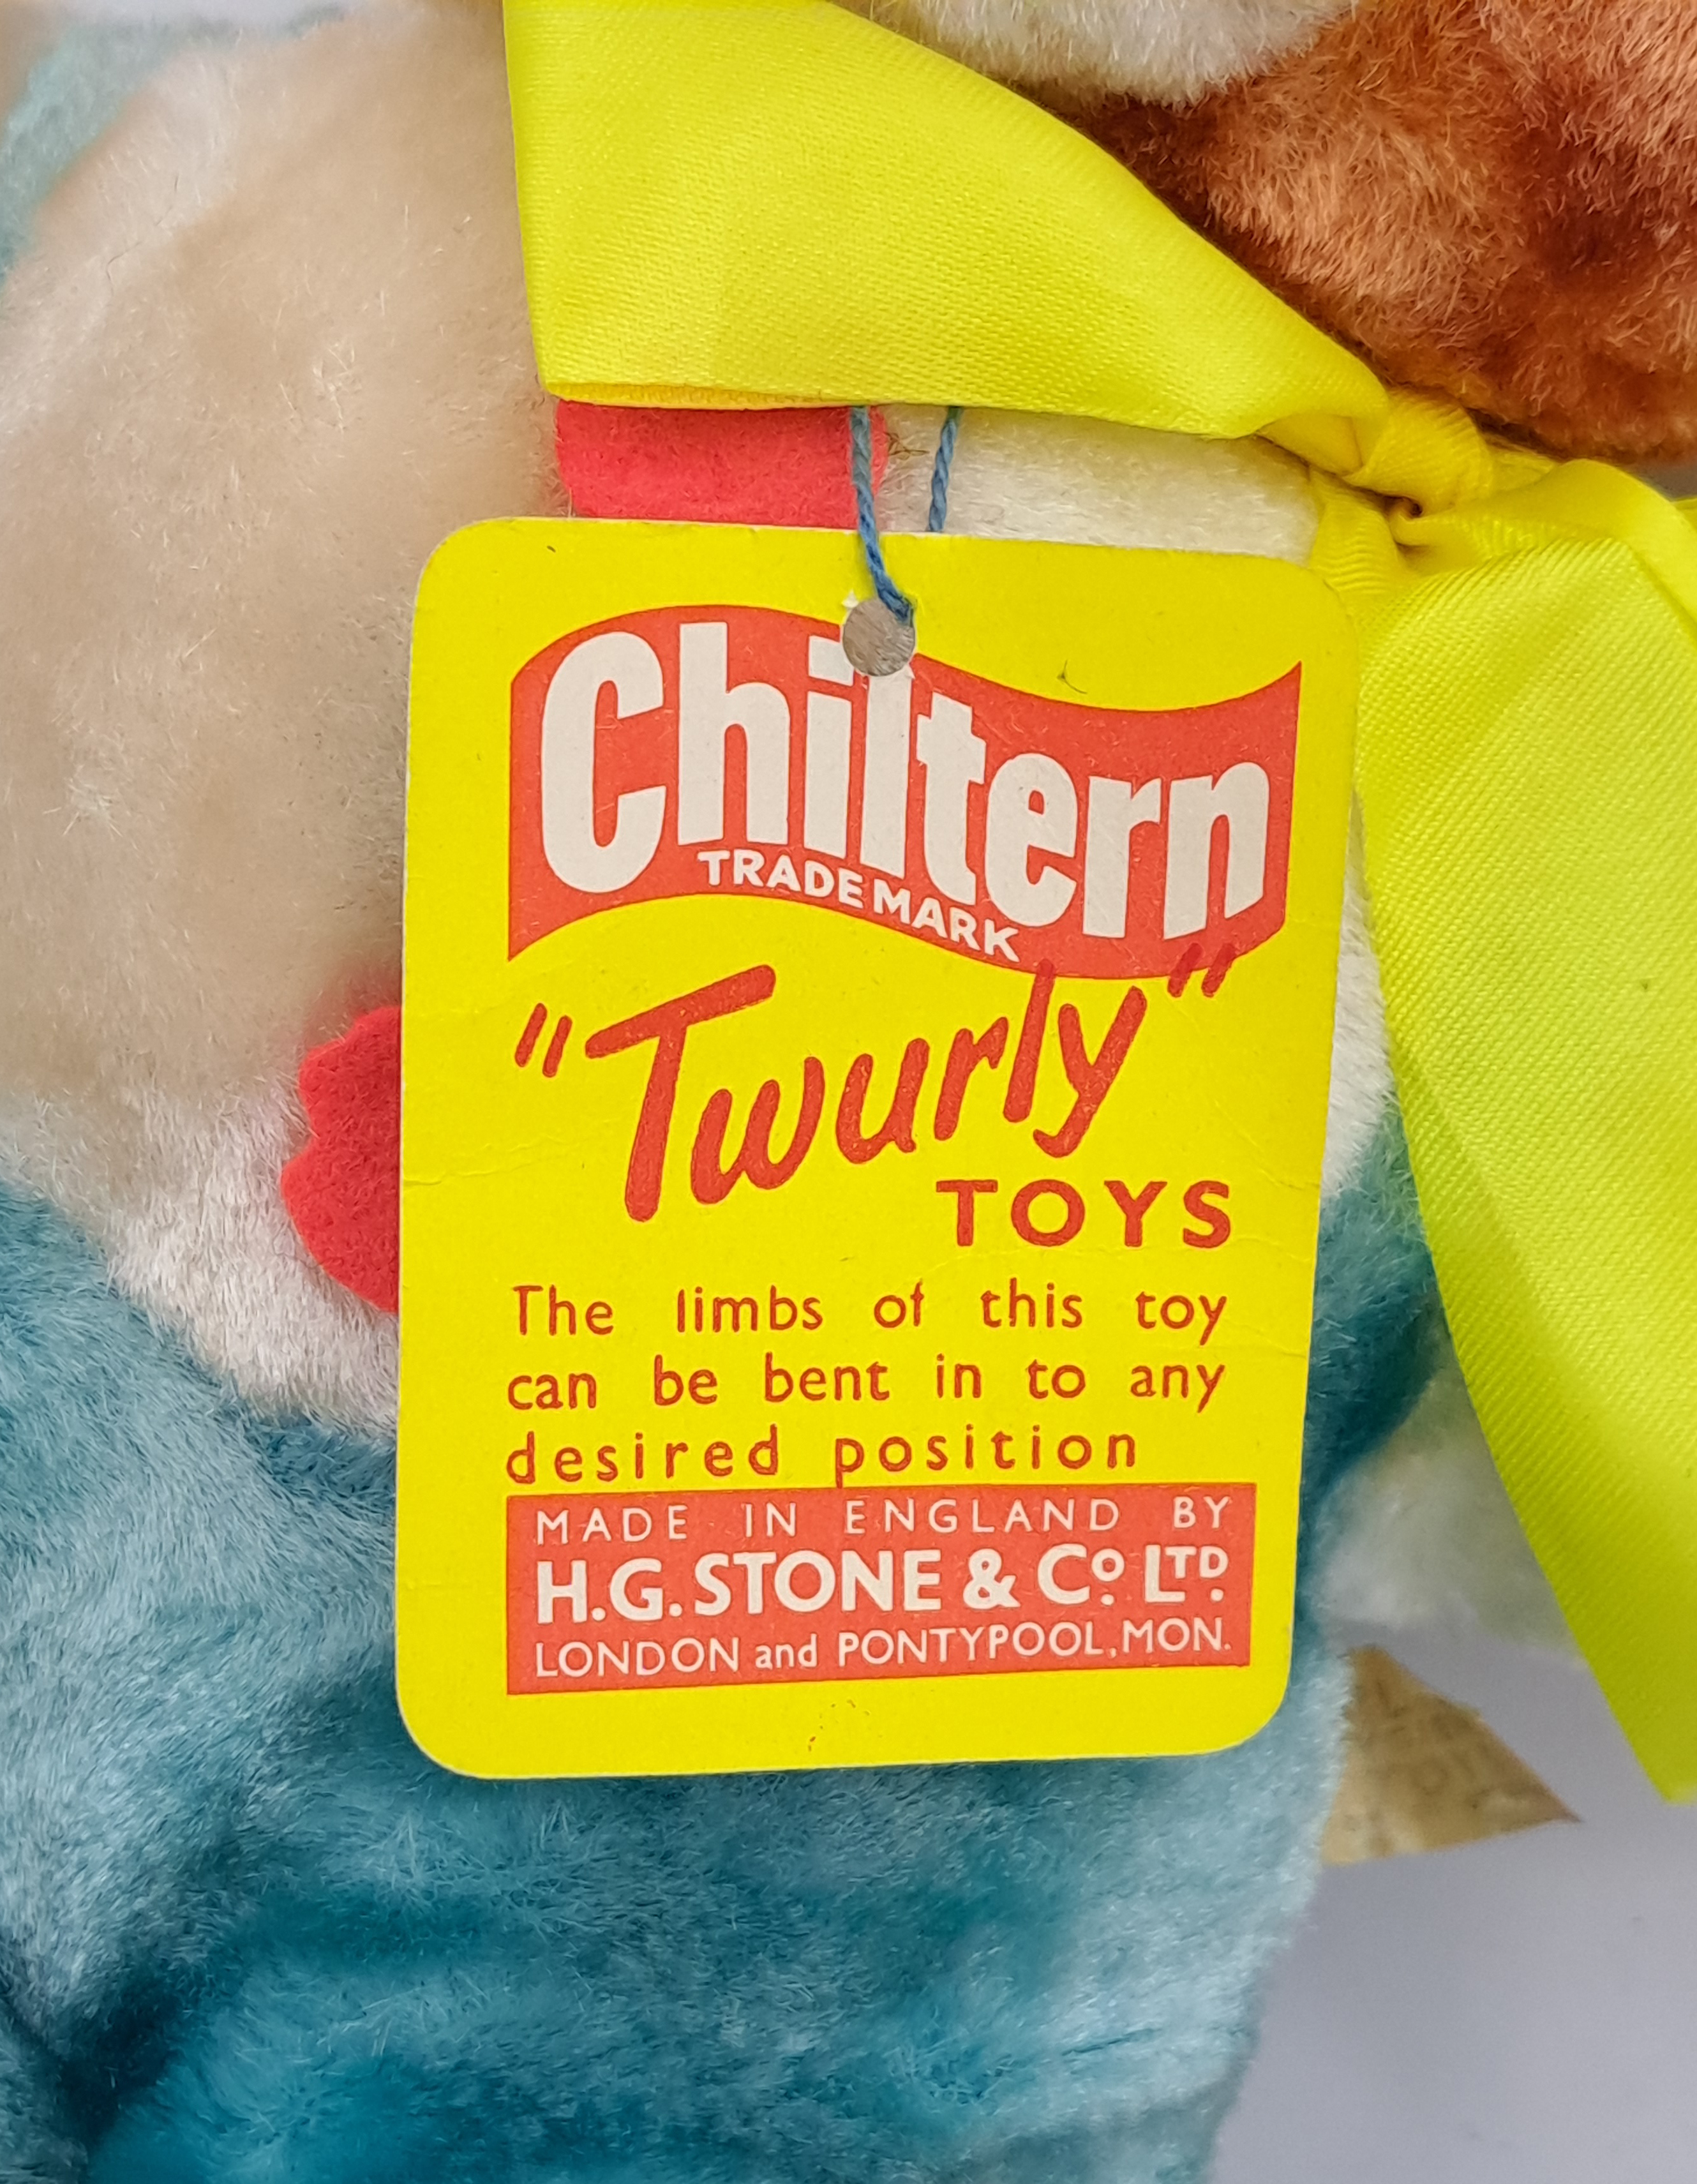 Chiltern pair of vintage Twurly Toys - Image 2 of 3